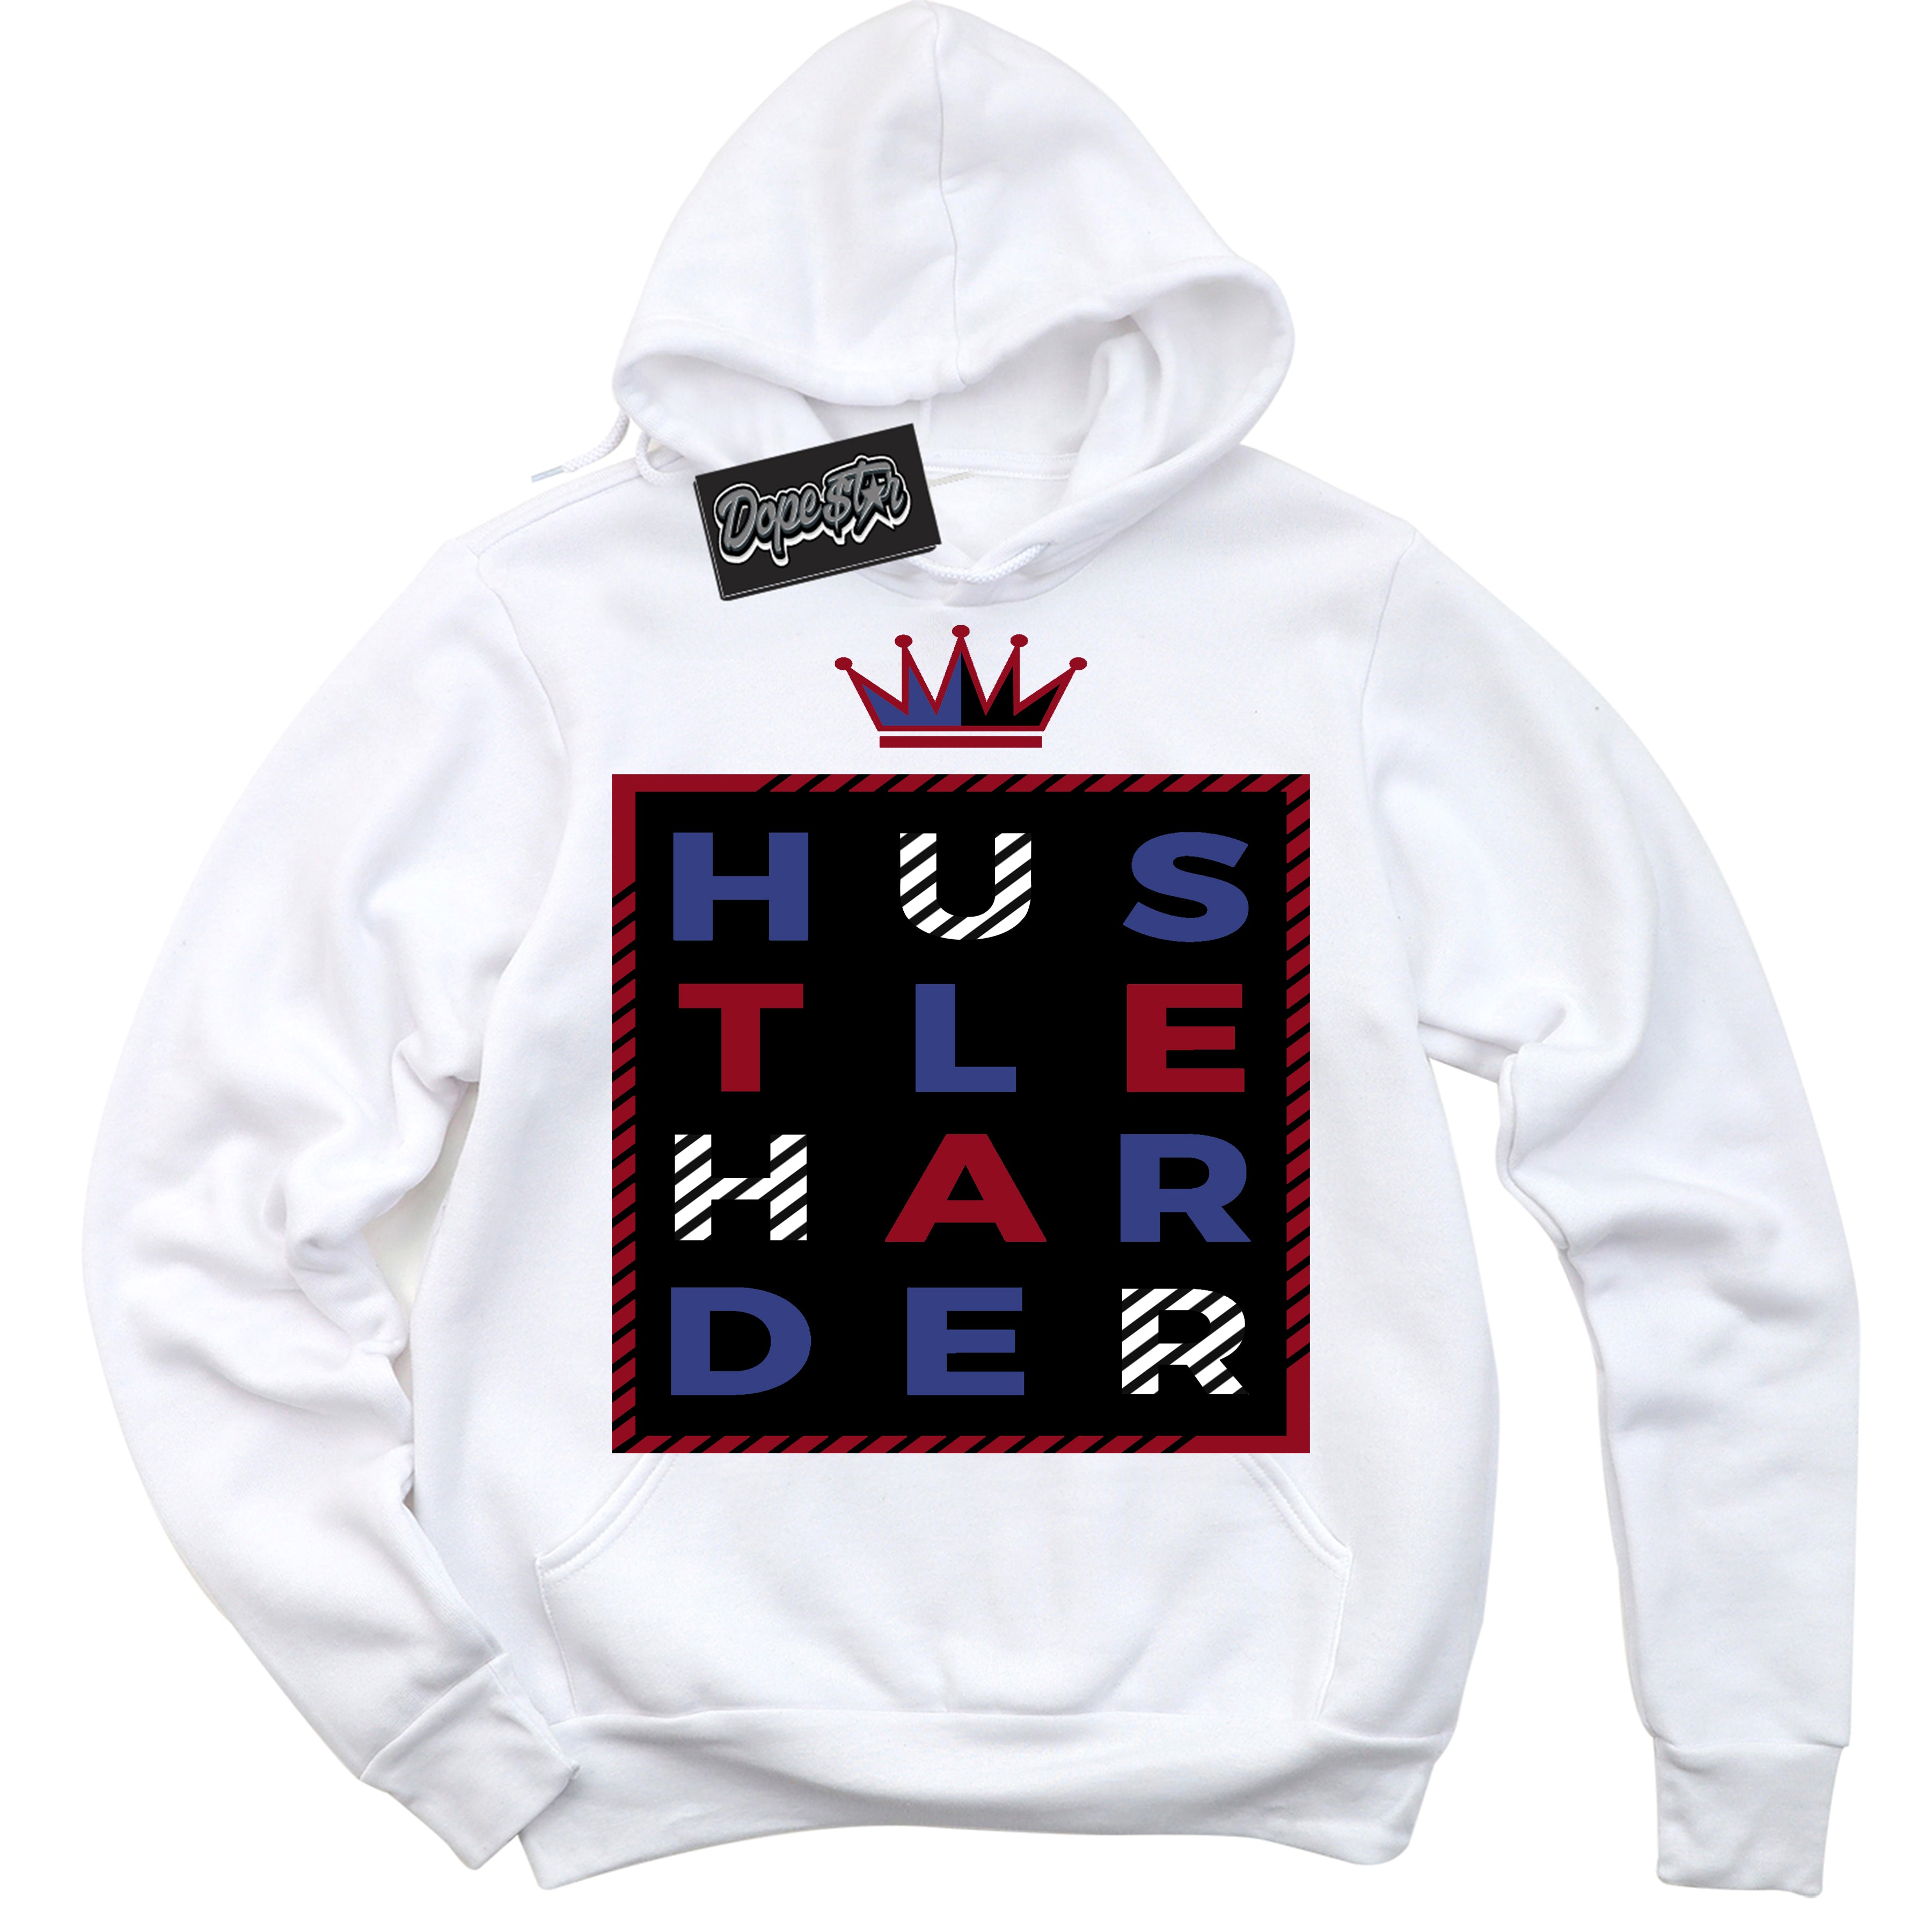 Cool White Hoodie with “ Hustle Harder ”  design that Perfectly Matches Playoffs 8s Sneakers.